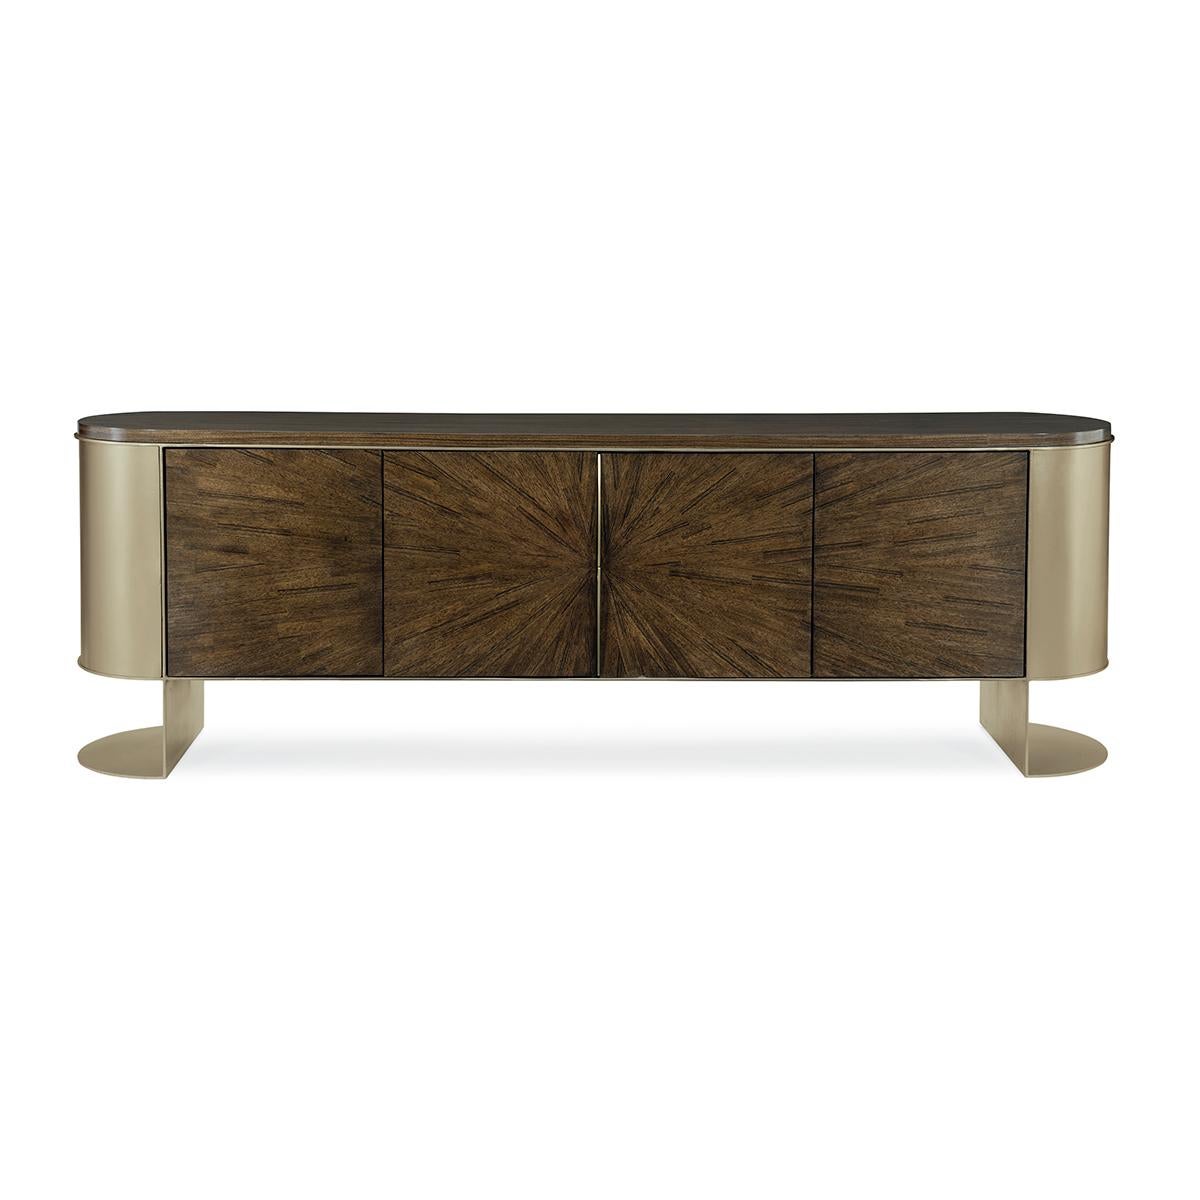 Art Deco Paldoa Sideboard, with uncompromising style, this credenza is destined to become a room's focal point. You can’t help but stare at its unforgettably stylish doors crafted of radial matched Paldao veneers. Its metal frame and curved ends